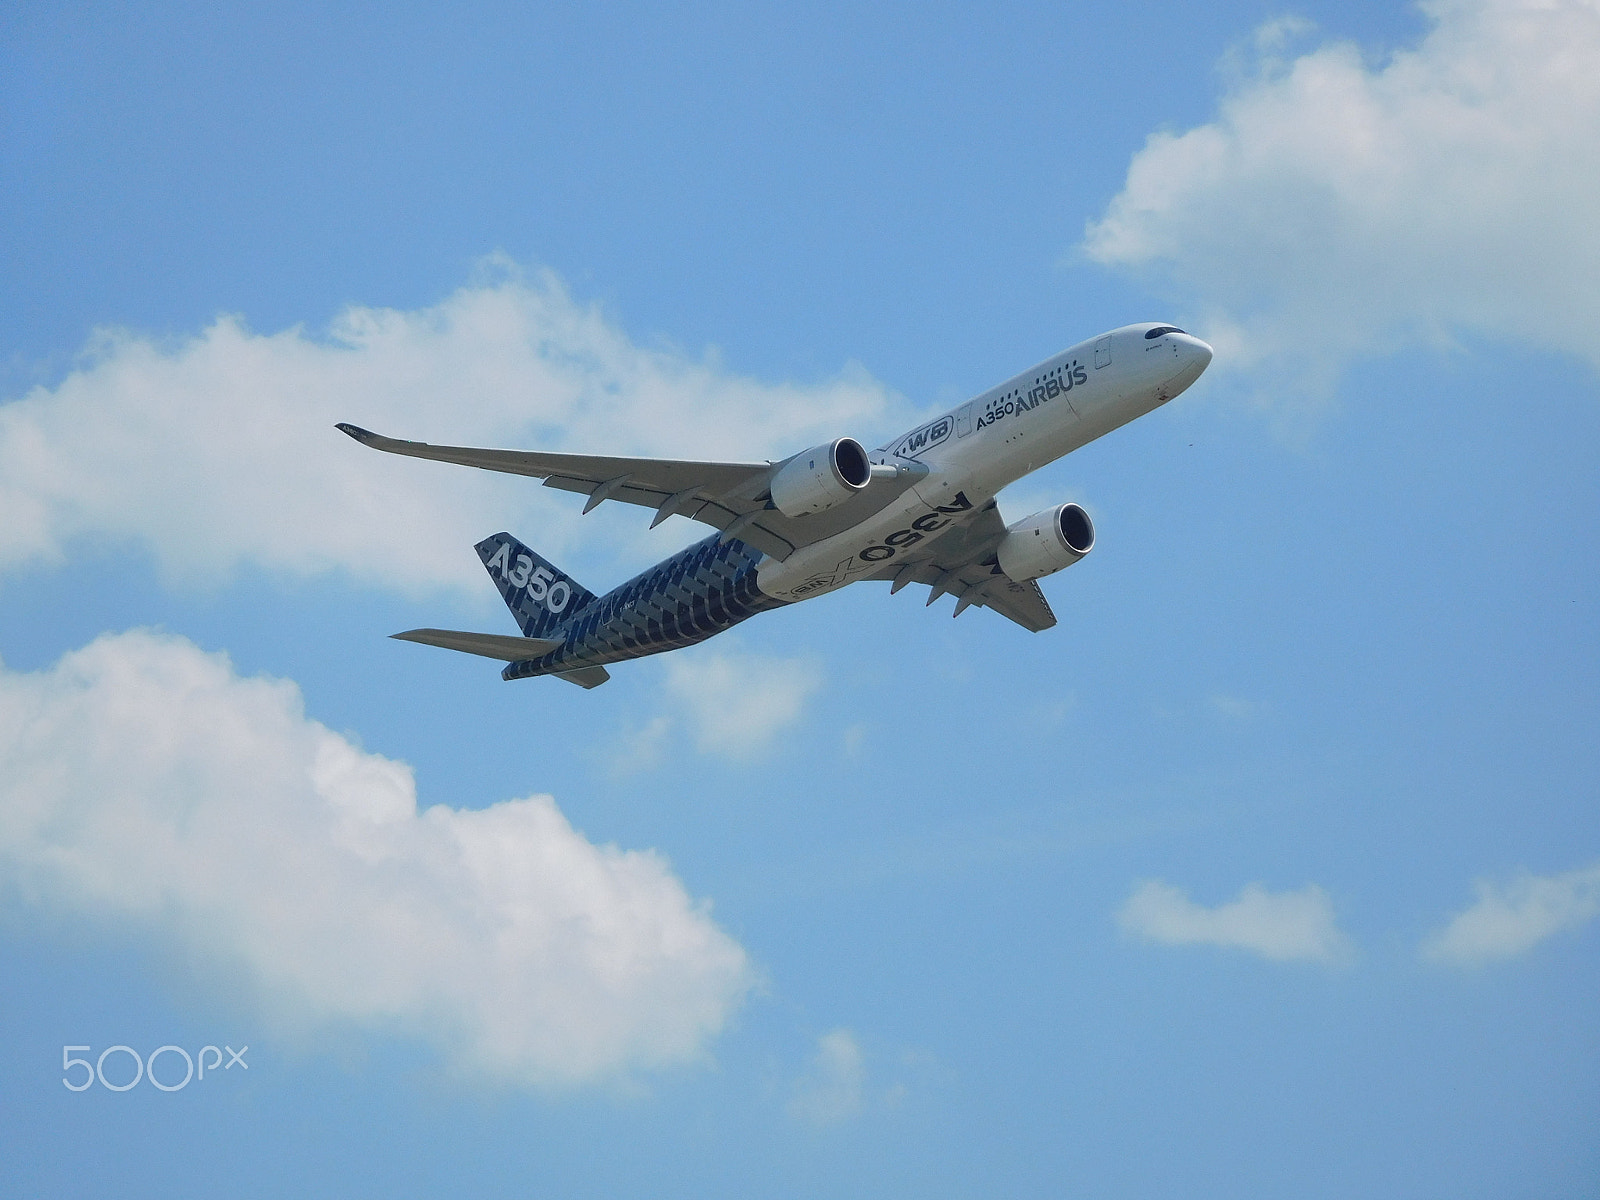 Nikon Coolpix S7000 sample photo. Airbus a350 in the air photography